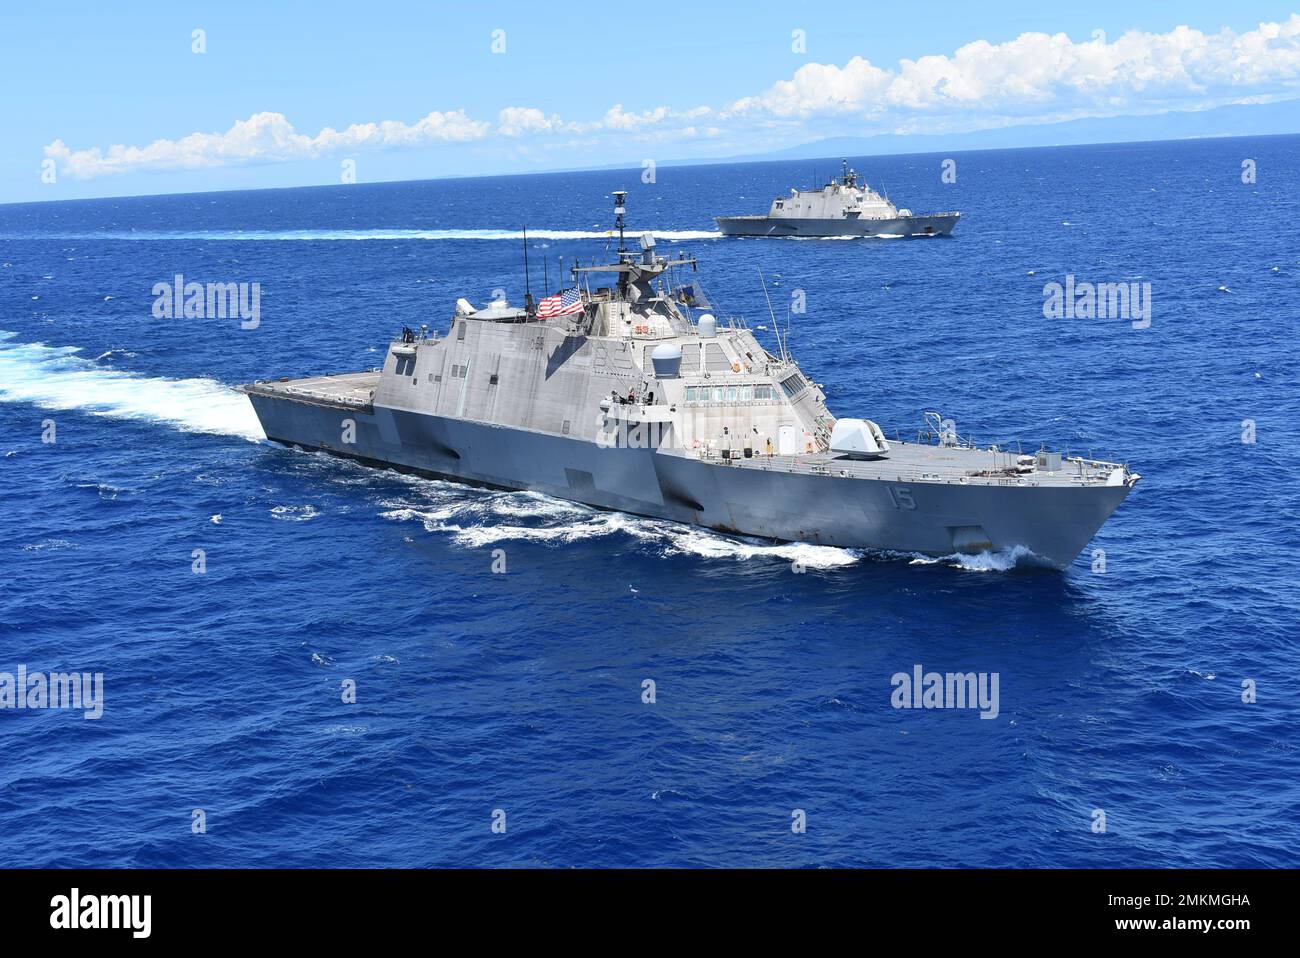 220910-N-N3764-2001  Caribbean Sea - (Sept. 10, 2022) — The Freedom-variant littoral combat ships USS Billings (LCS 15) and USS Wichita (LCS 13) participate in a photo exercise in the Caribbean Sea, Sept. 10, 2022. Wichita and Billings are deployed to the U.S. 4th Fleet area of operations to support Joint Interagency Task Force South’s mission, which includes counter-illicit drug trafficking missions in the Caribbean and Eastern Pacific. Stock Photo